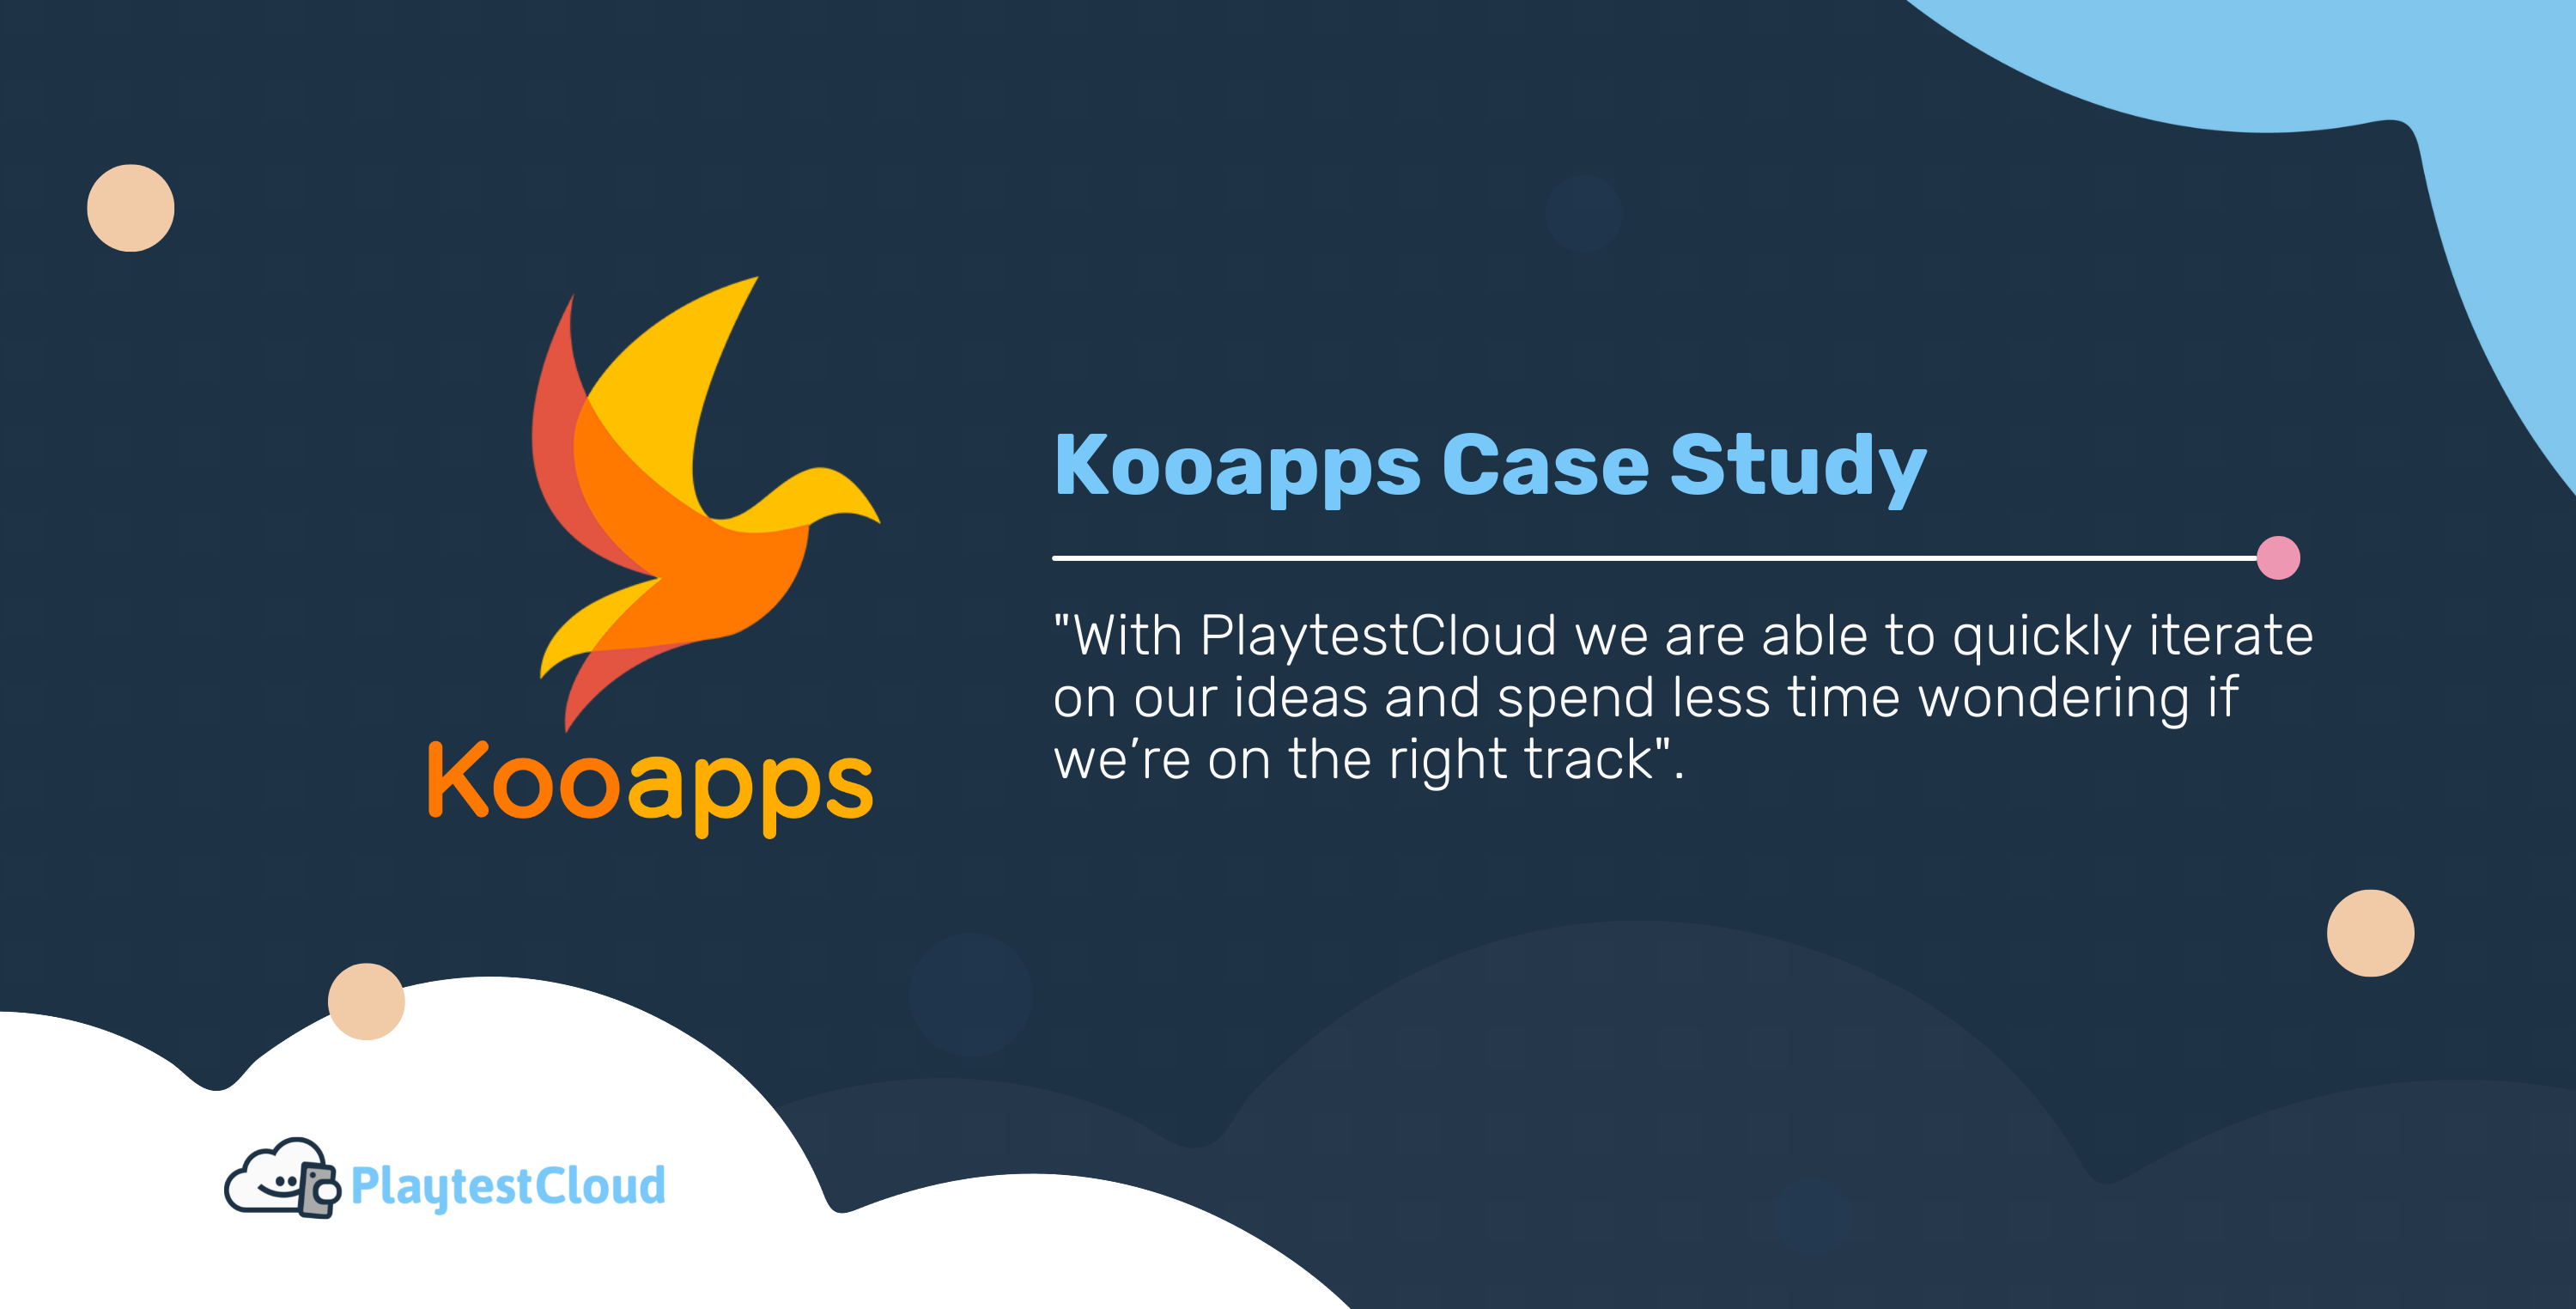 Playtesting helped Kooapps increase daily active users by more than 10%